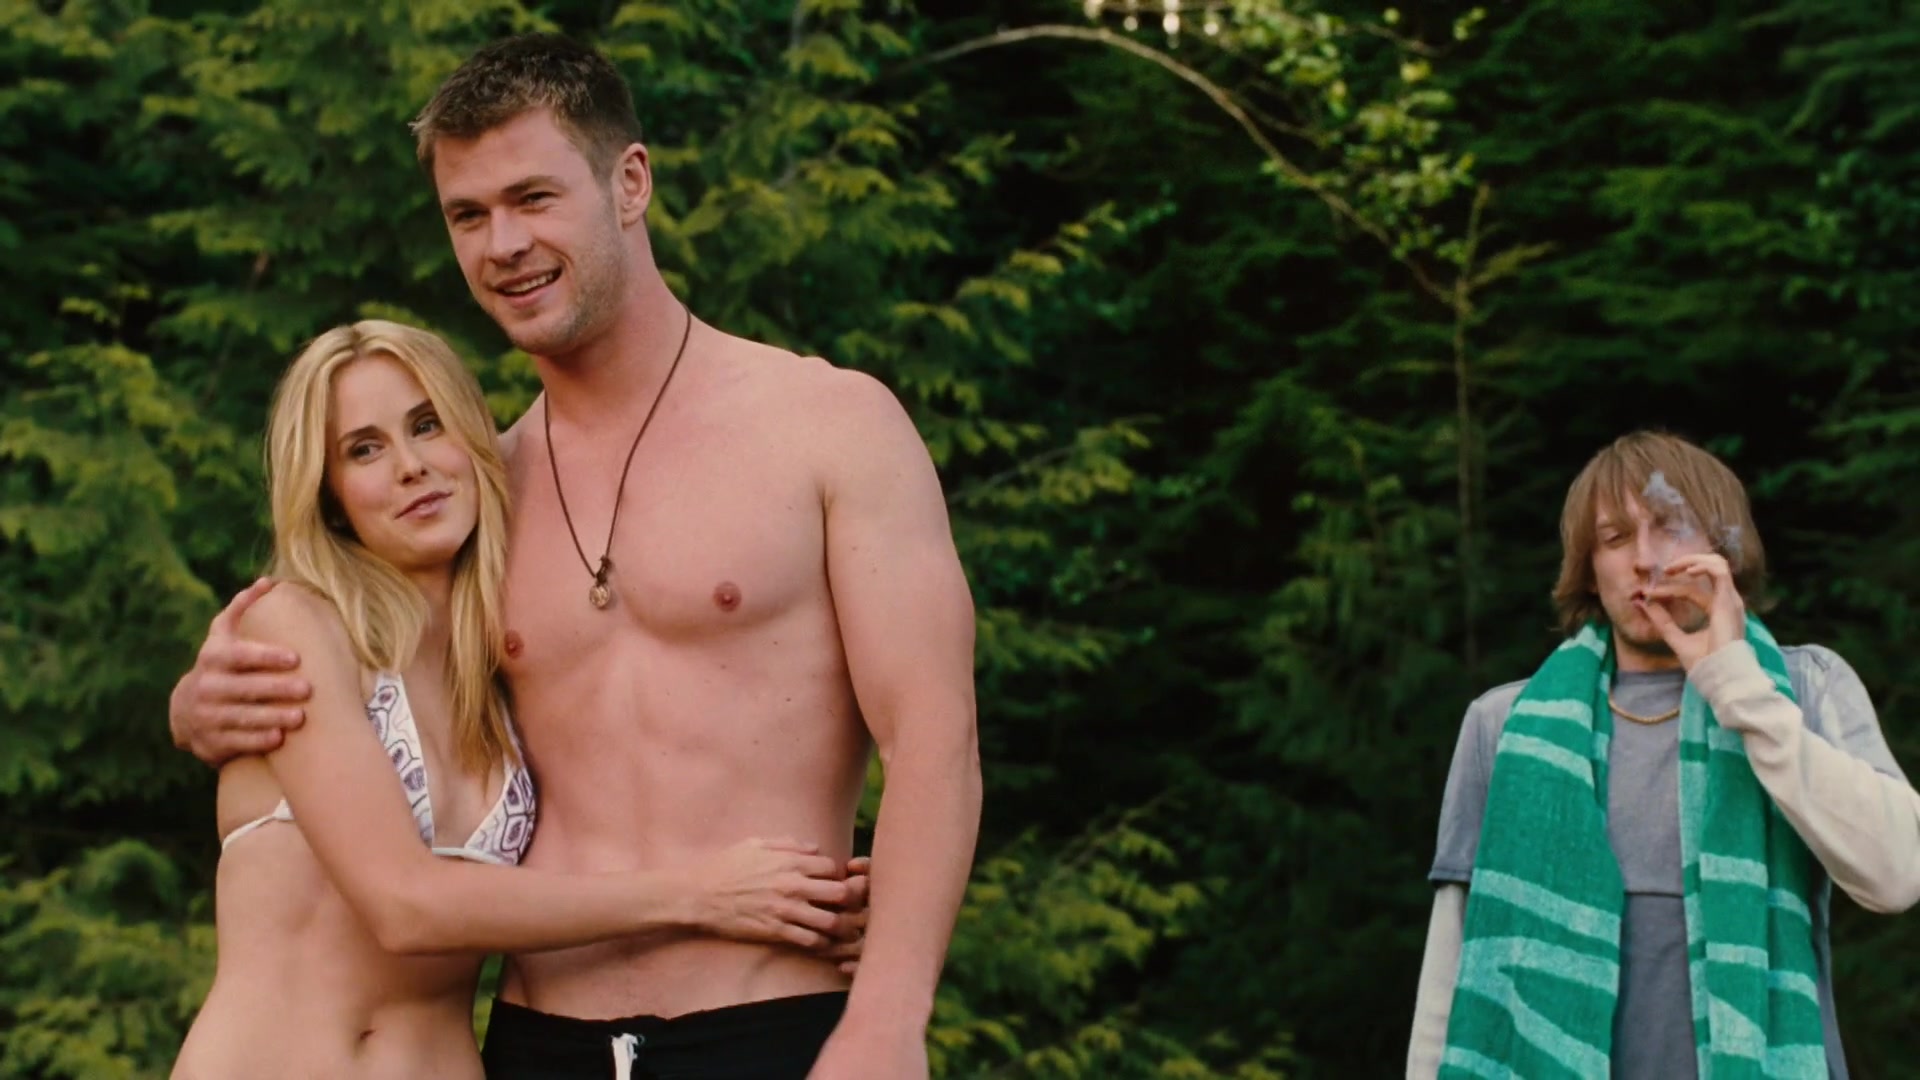 The cabin in the woods nudity